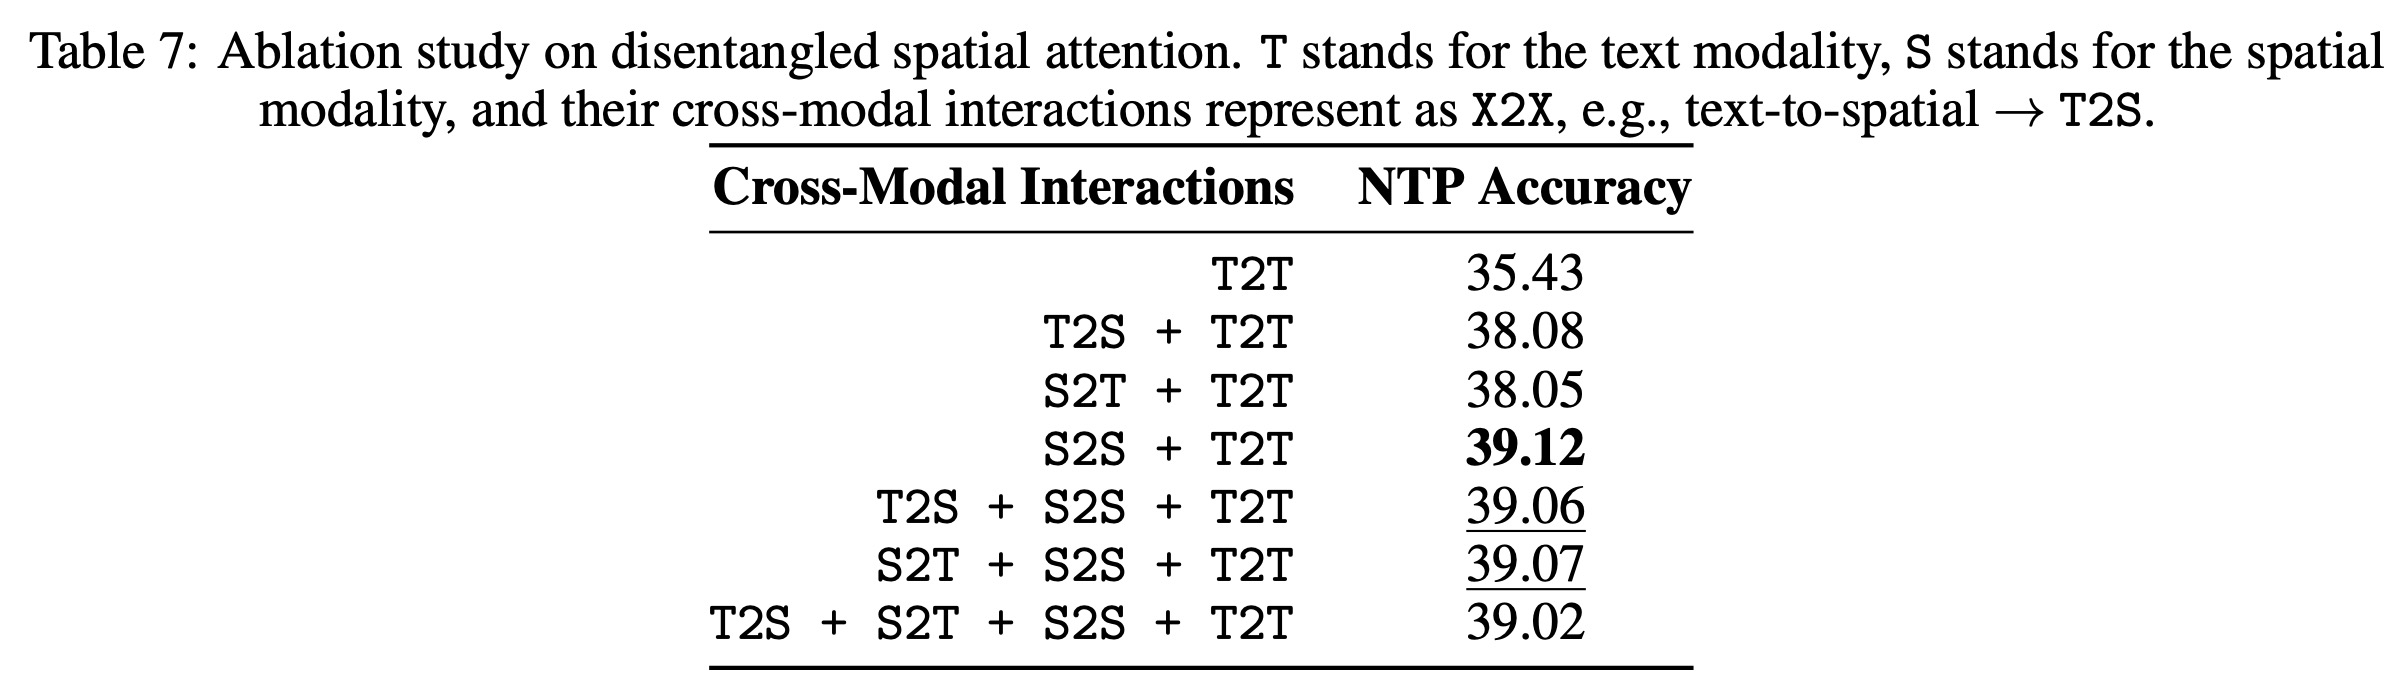 Disentangled spatial attention